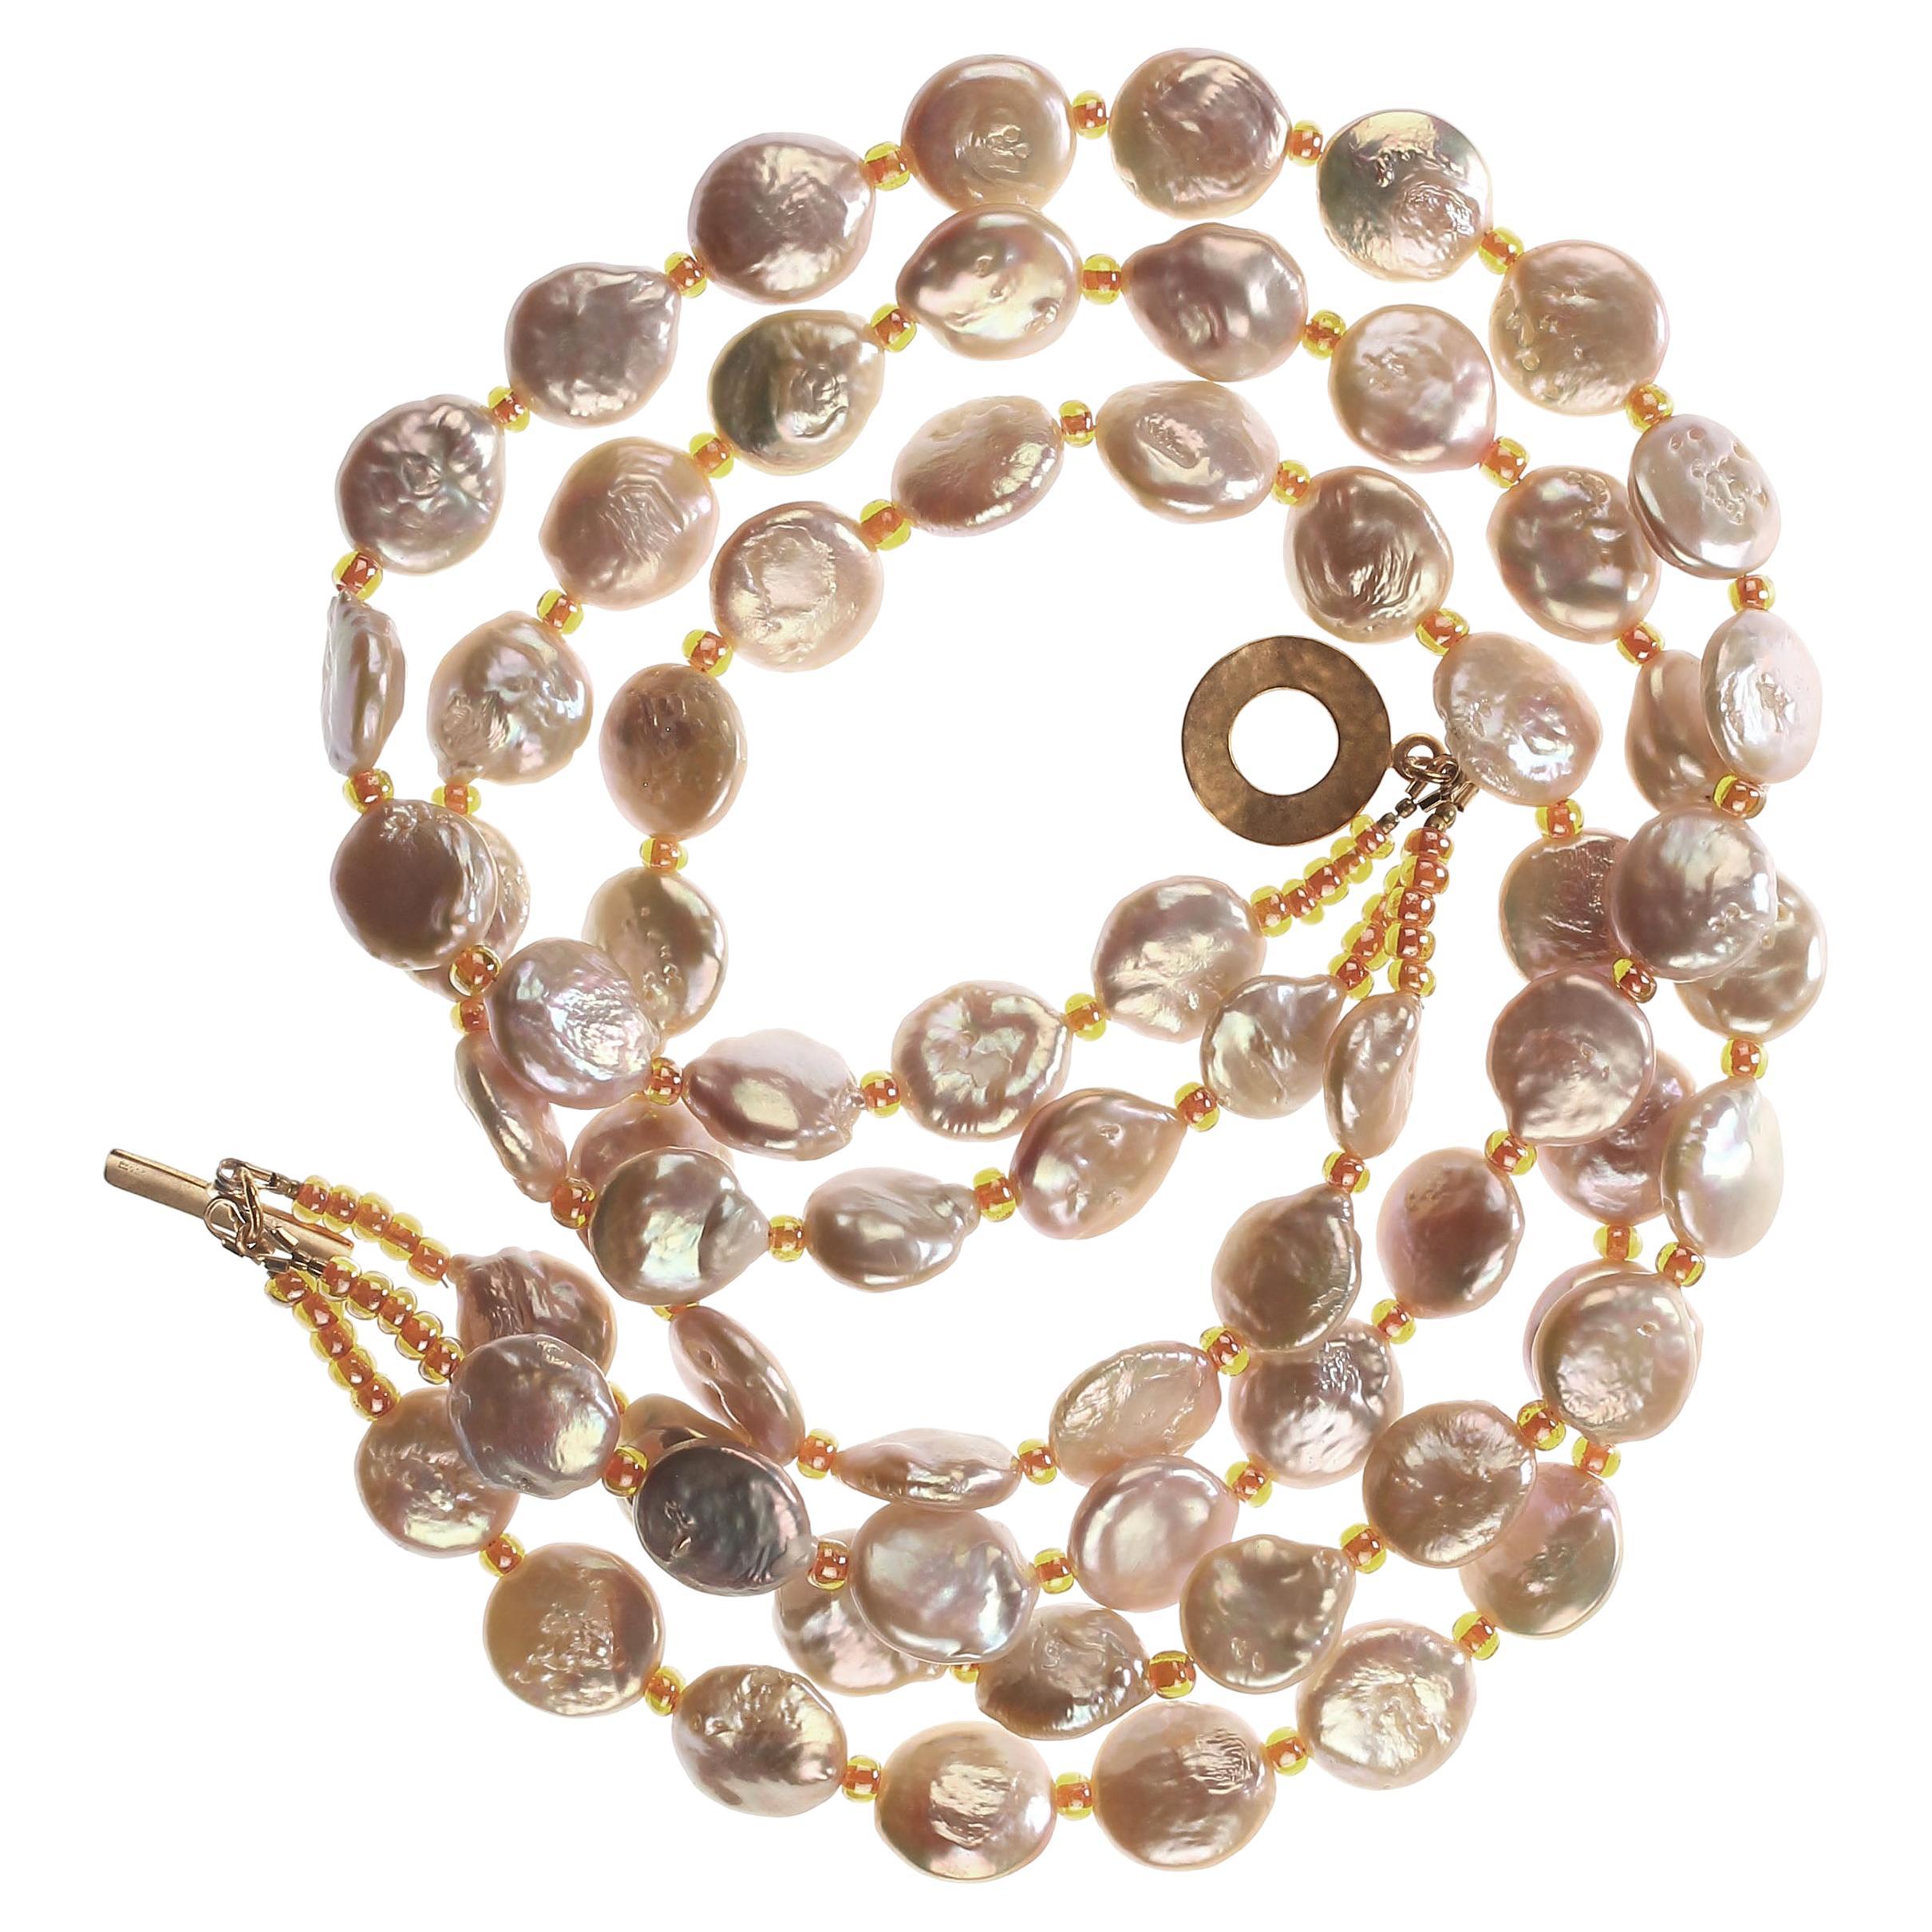 Own the pearls you deserve

Unique Coin Pearl triple strand necklace featuring peachy pink iridescent Coin Pearls and orange Czech beads.   This perfect Spring/Summer necklace is three strands of gorgeous pearls to drape around your neck or gently